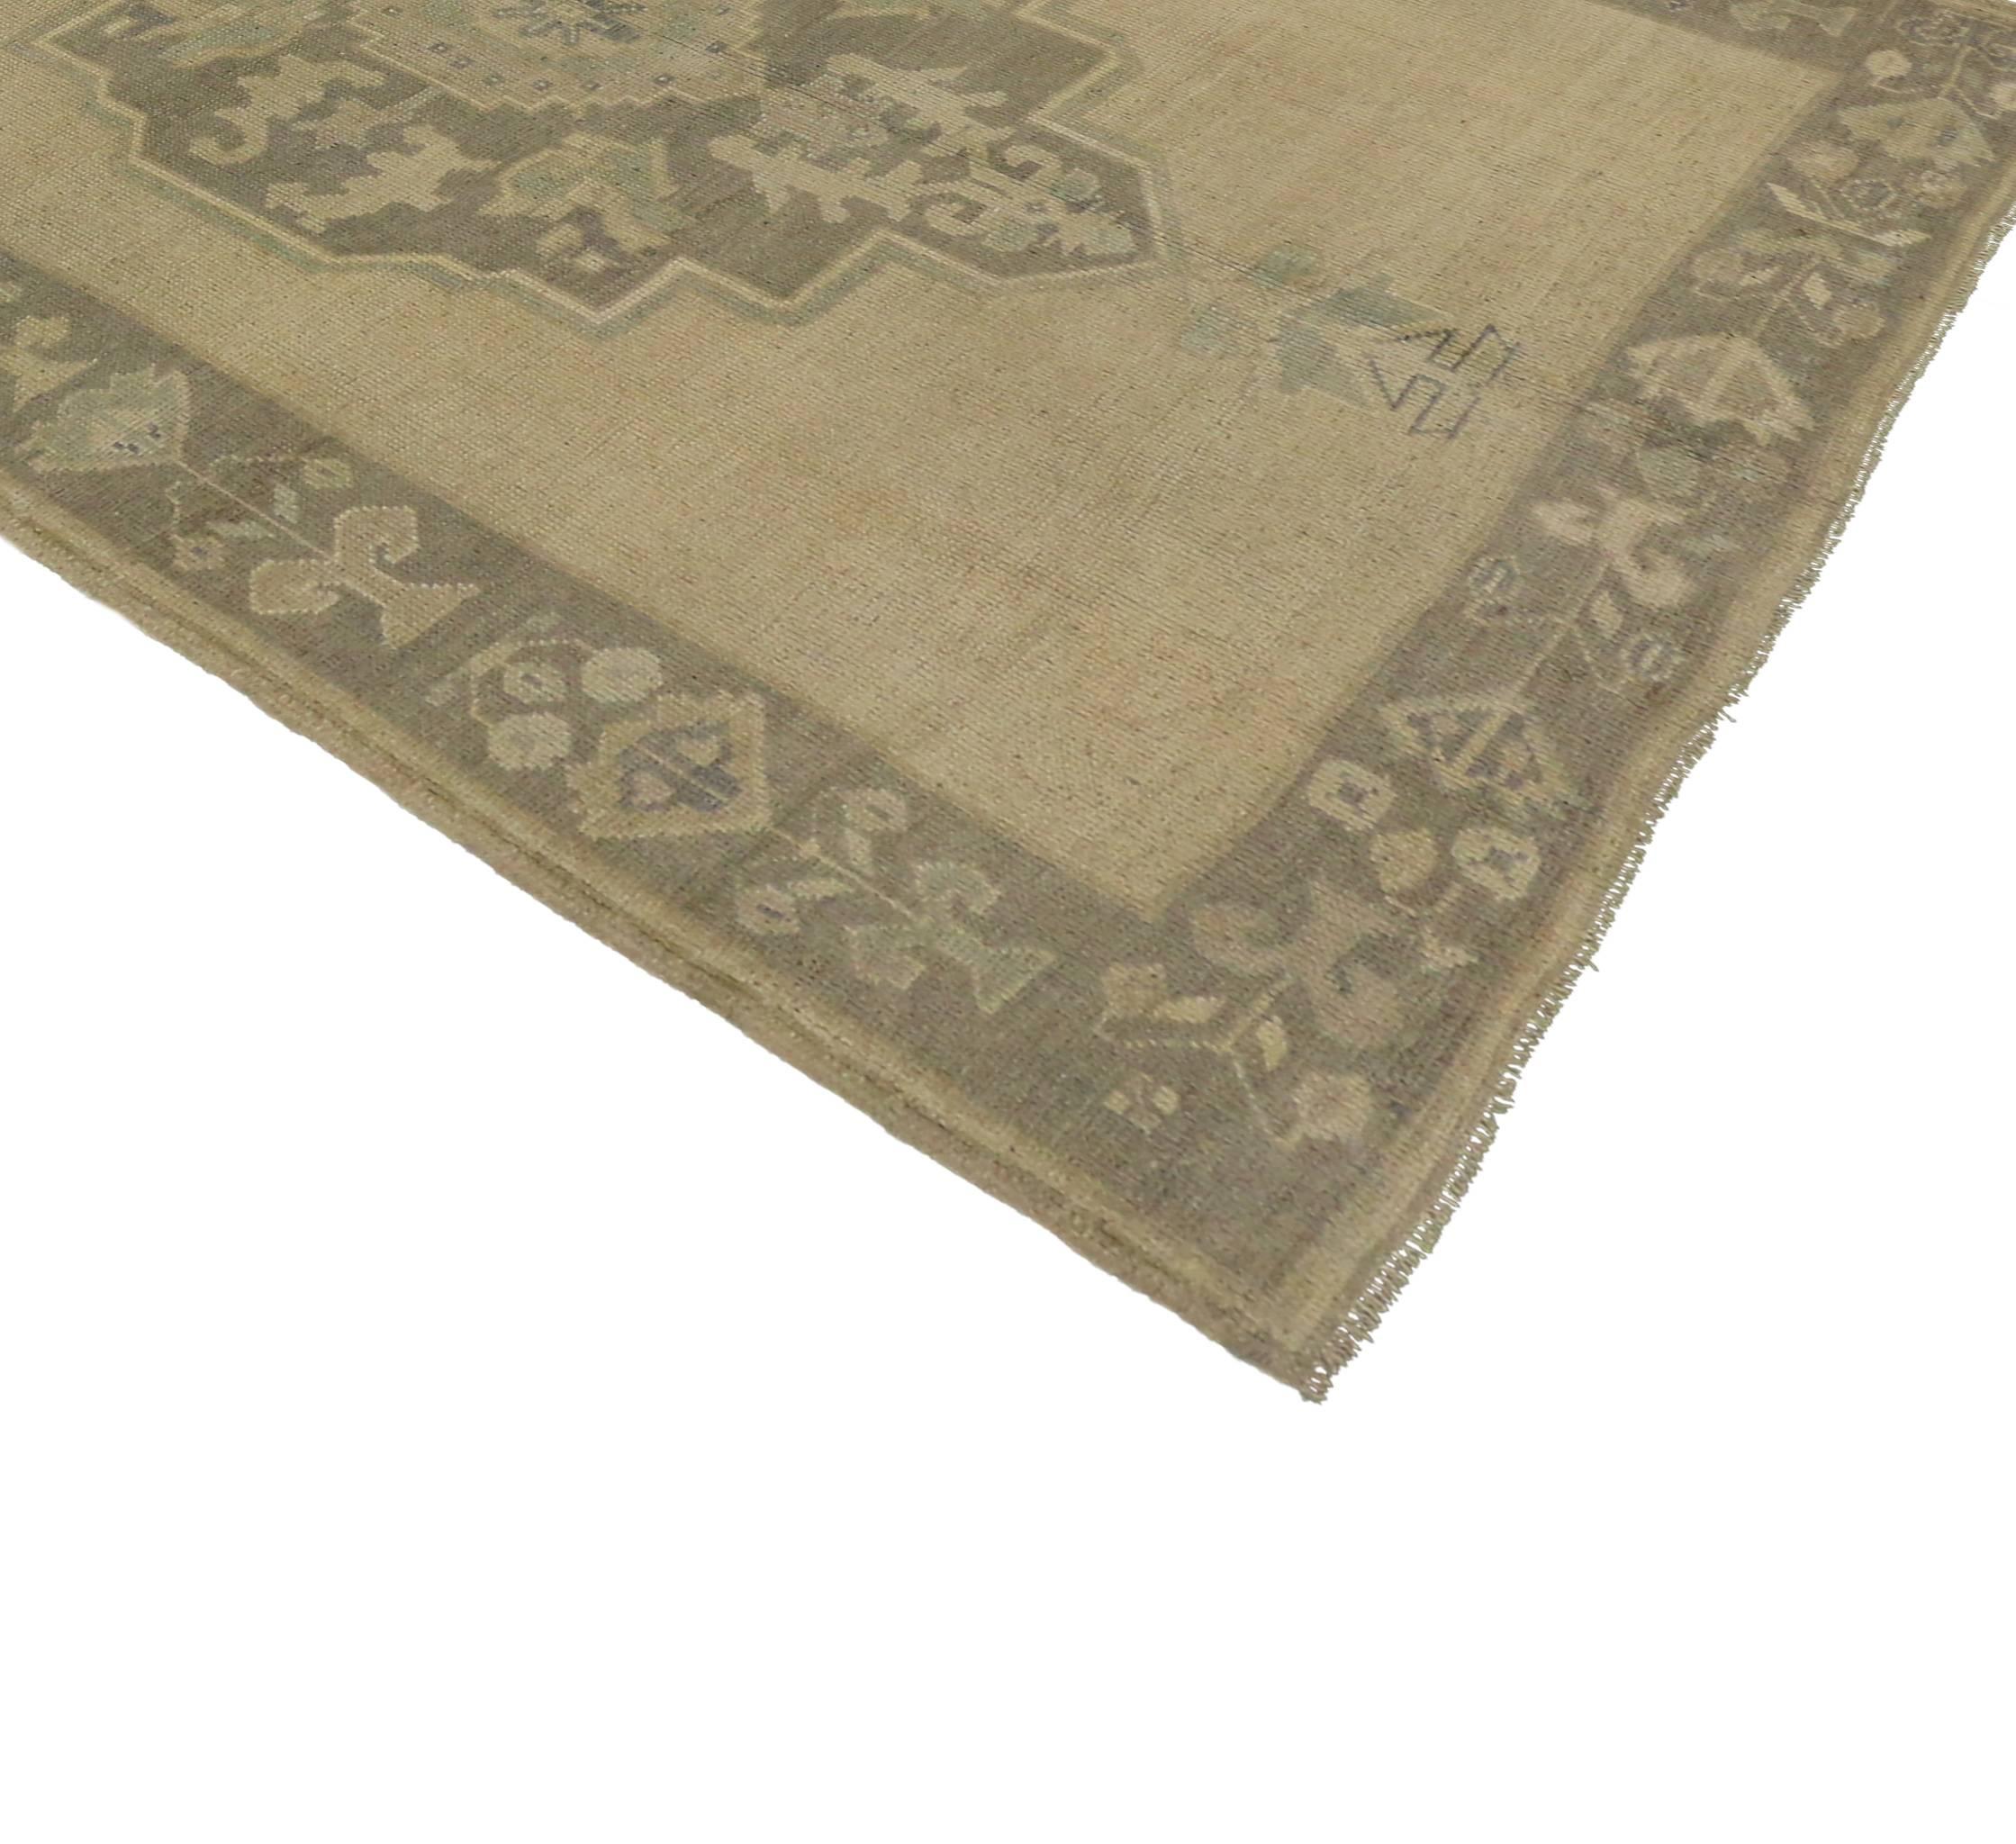 This stunning vintage Turkish Oushak carpet runner features a modern style in muted colors. Take a timeless, tailored design, mix in a dash of history and time-softened colors to get this fresh look that’s as comfortable as it is chic. Elegant